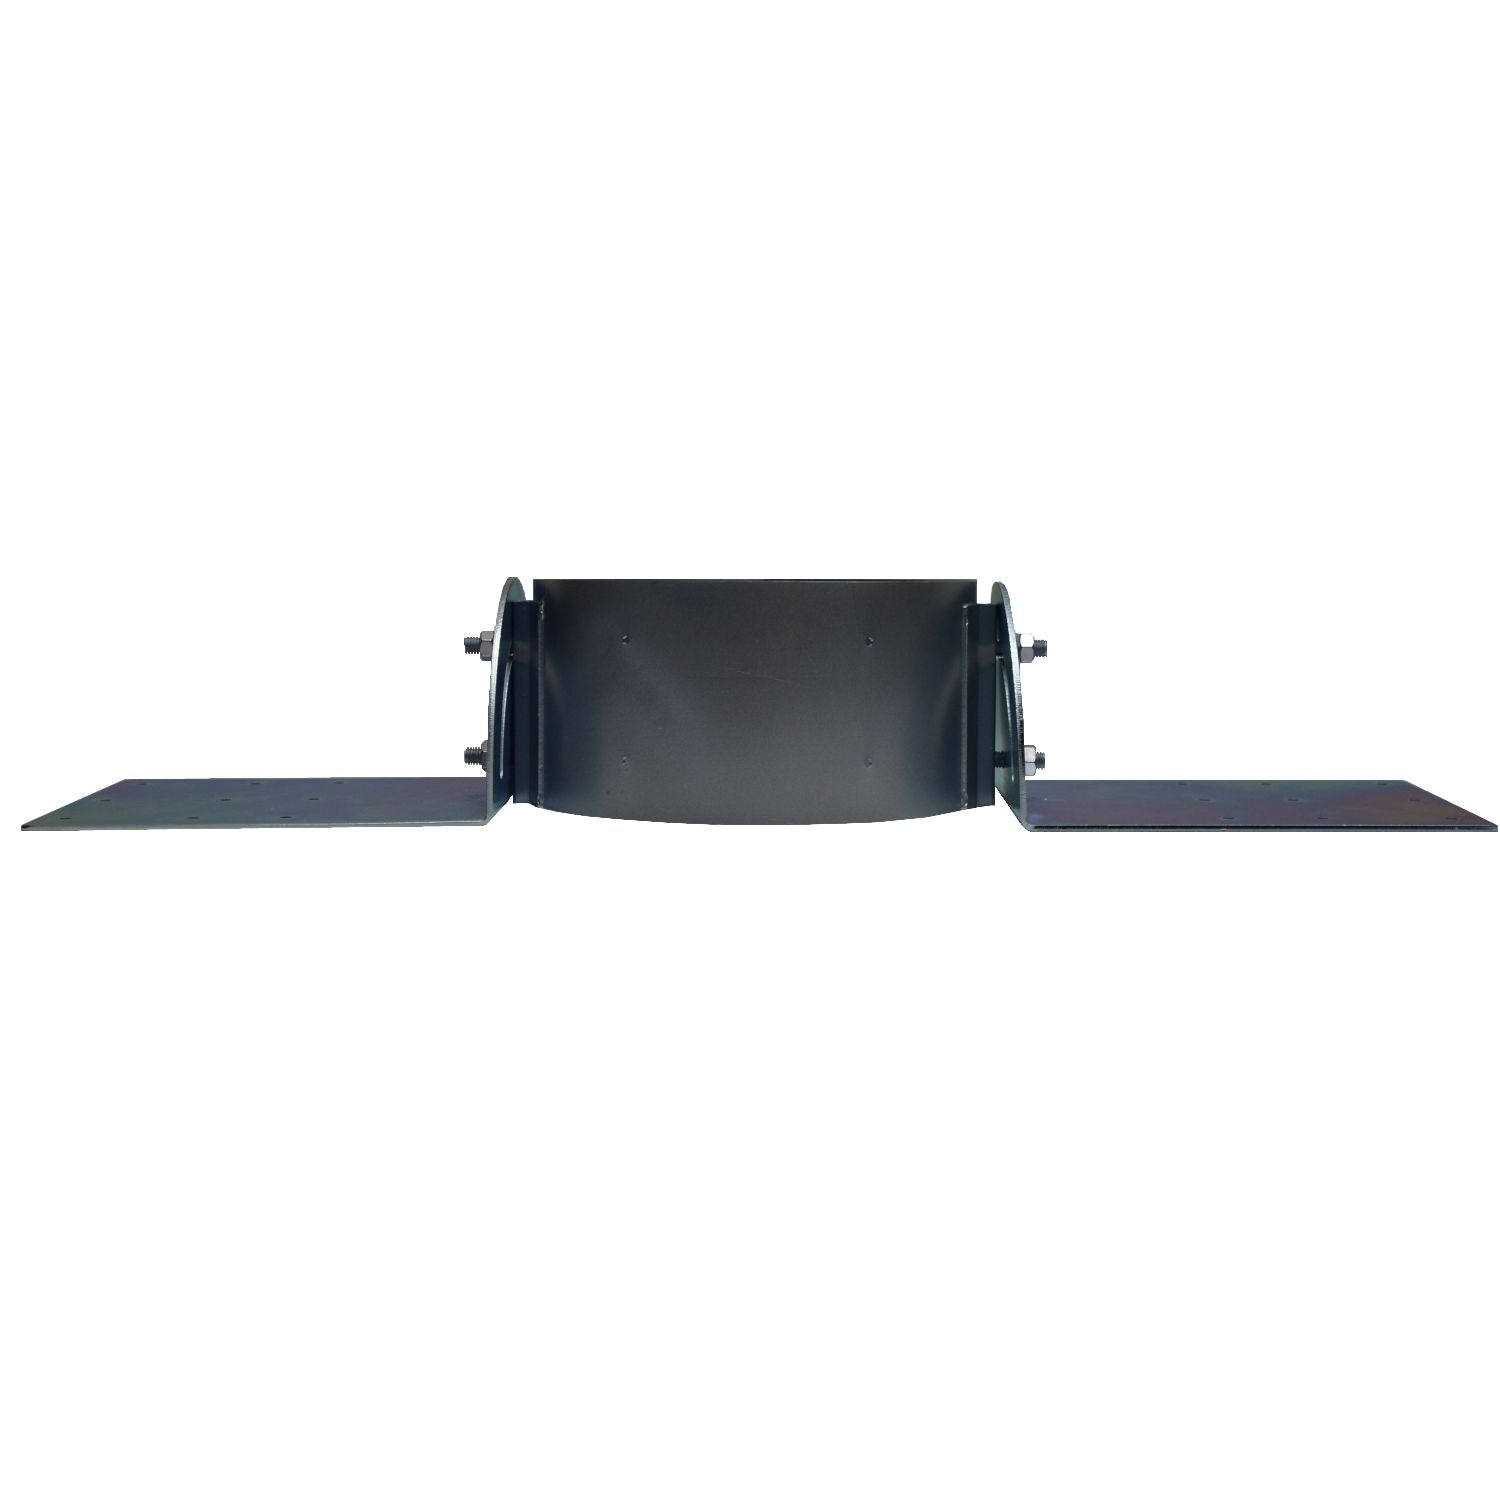 8" RSF Ceiling Support Brace